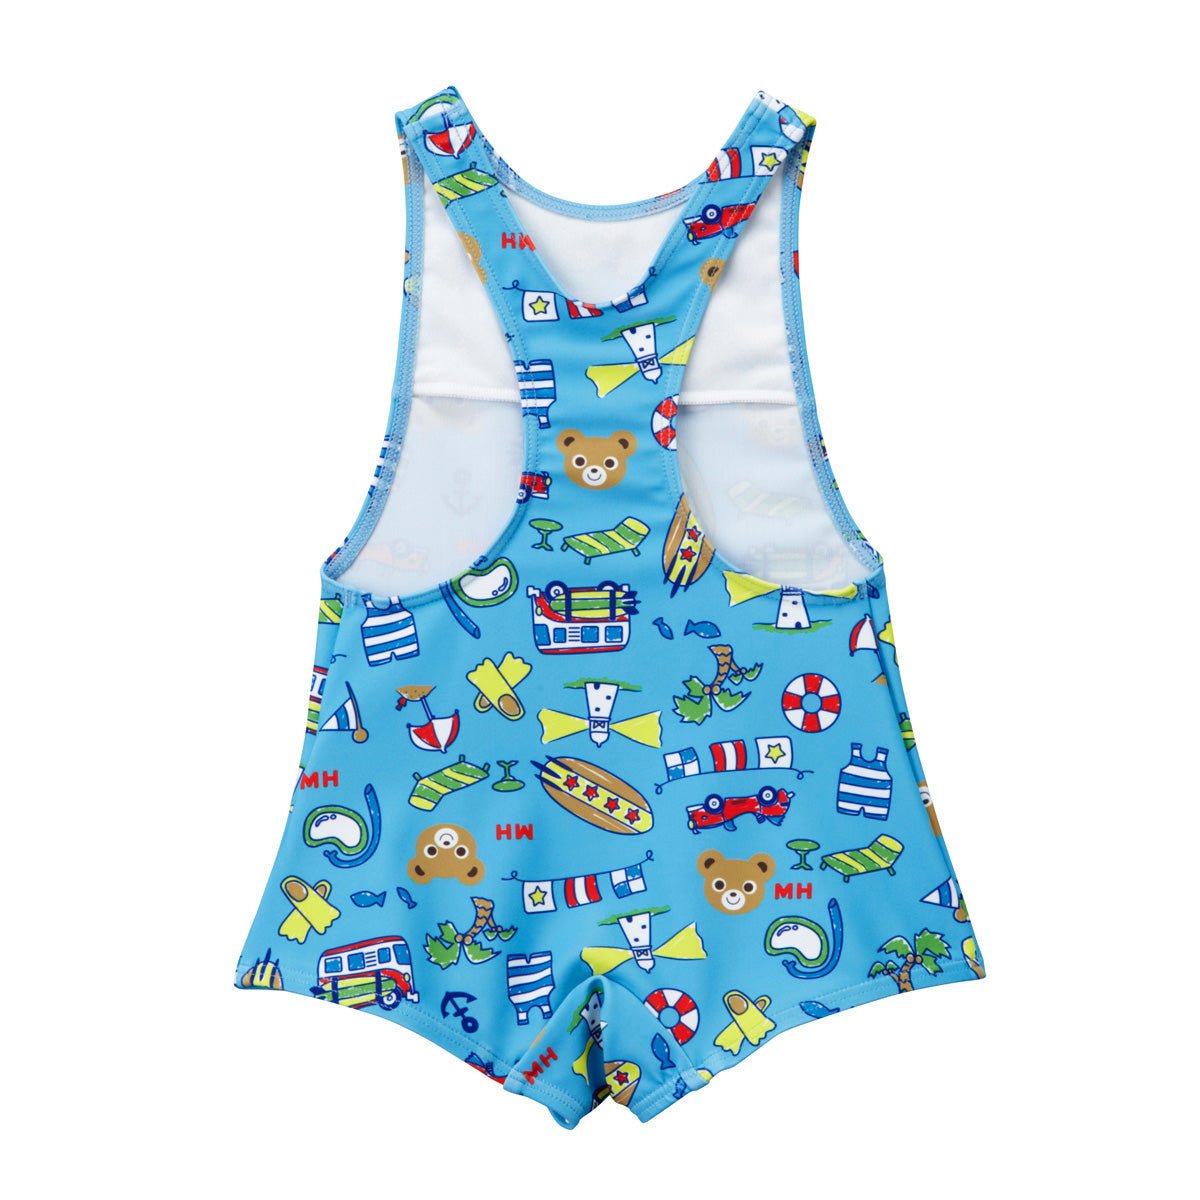 Boy’s One-piece Swimsuit (UV Protection) - 12-7101-617-15-80